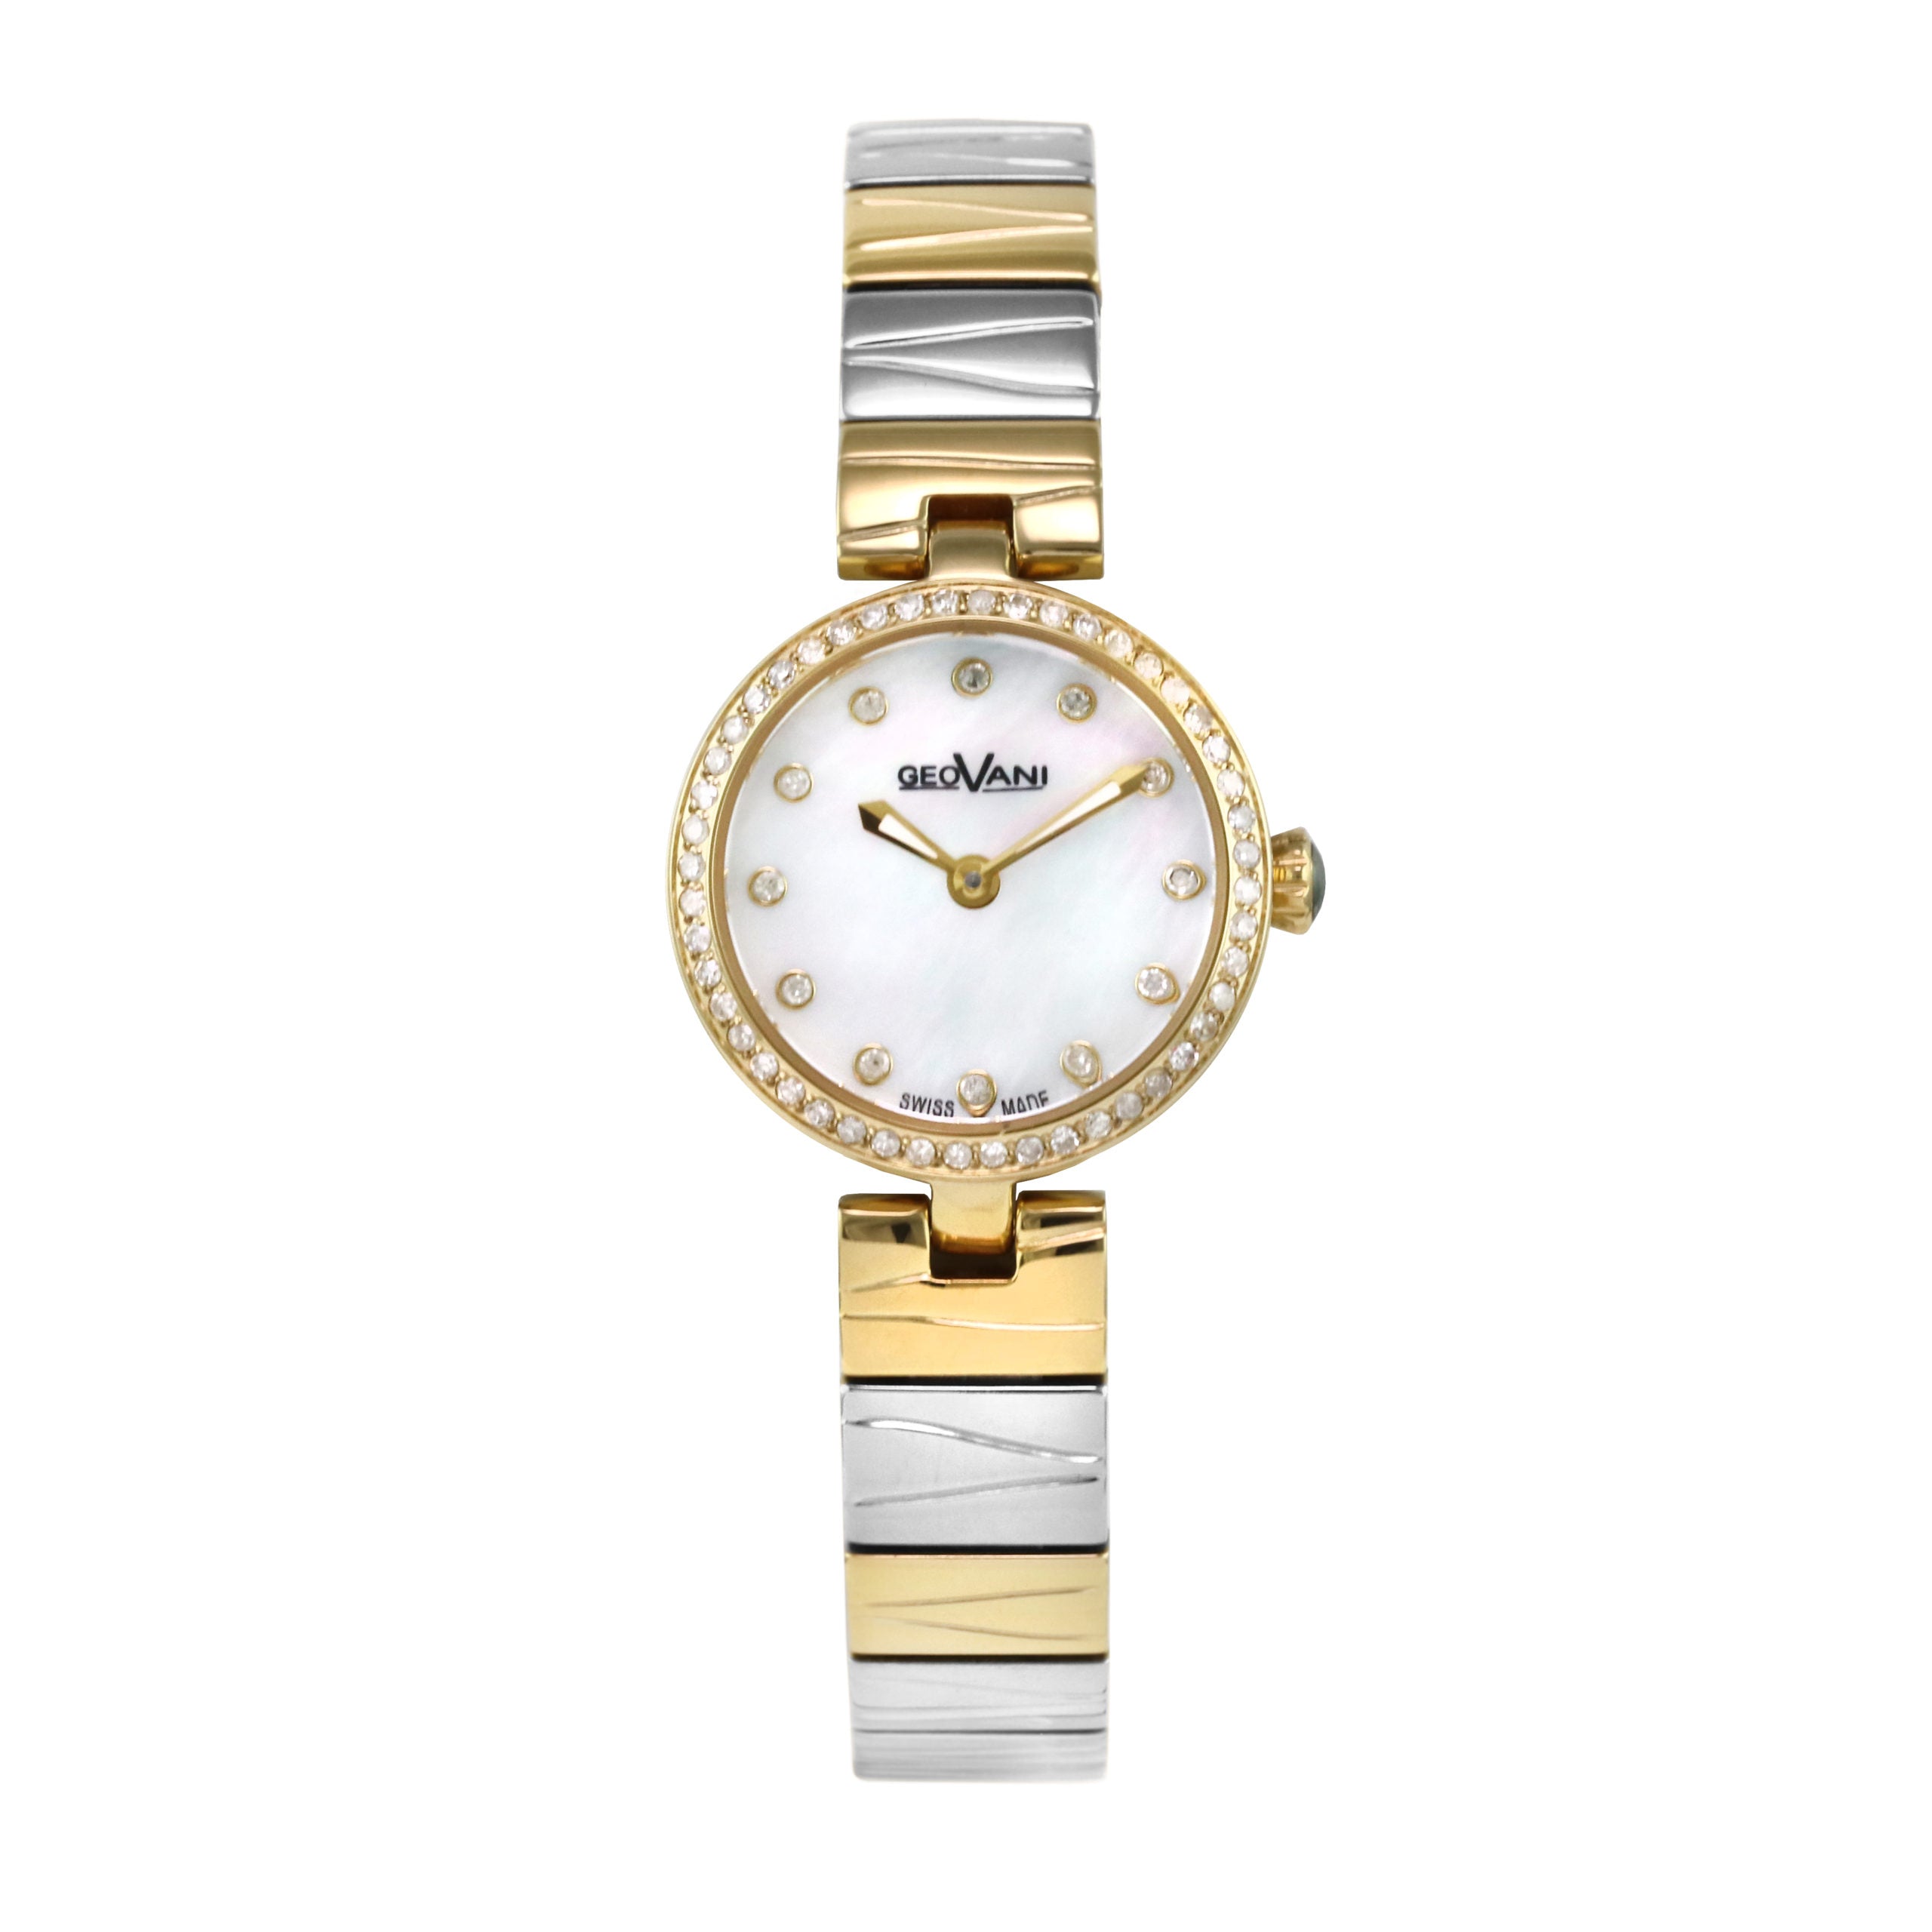 Giovanni Women's Swiss Quartz Watch with Pearly White Dial - GEO-0004